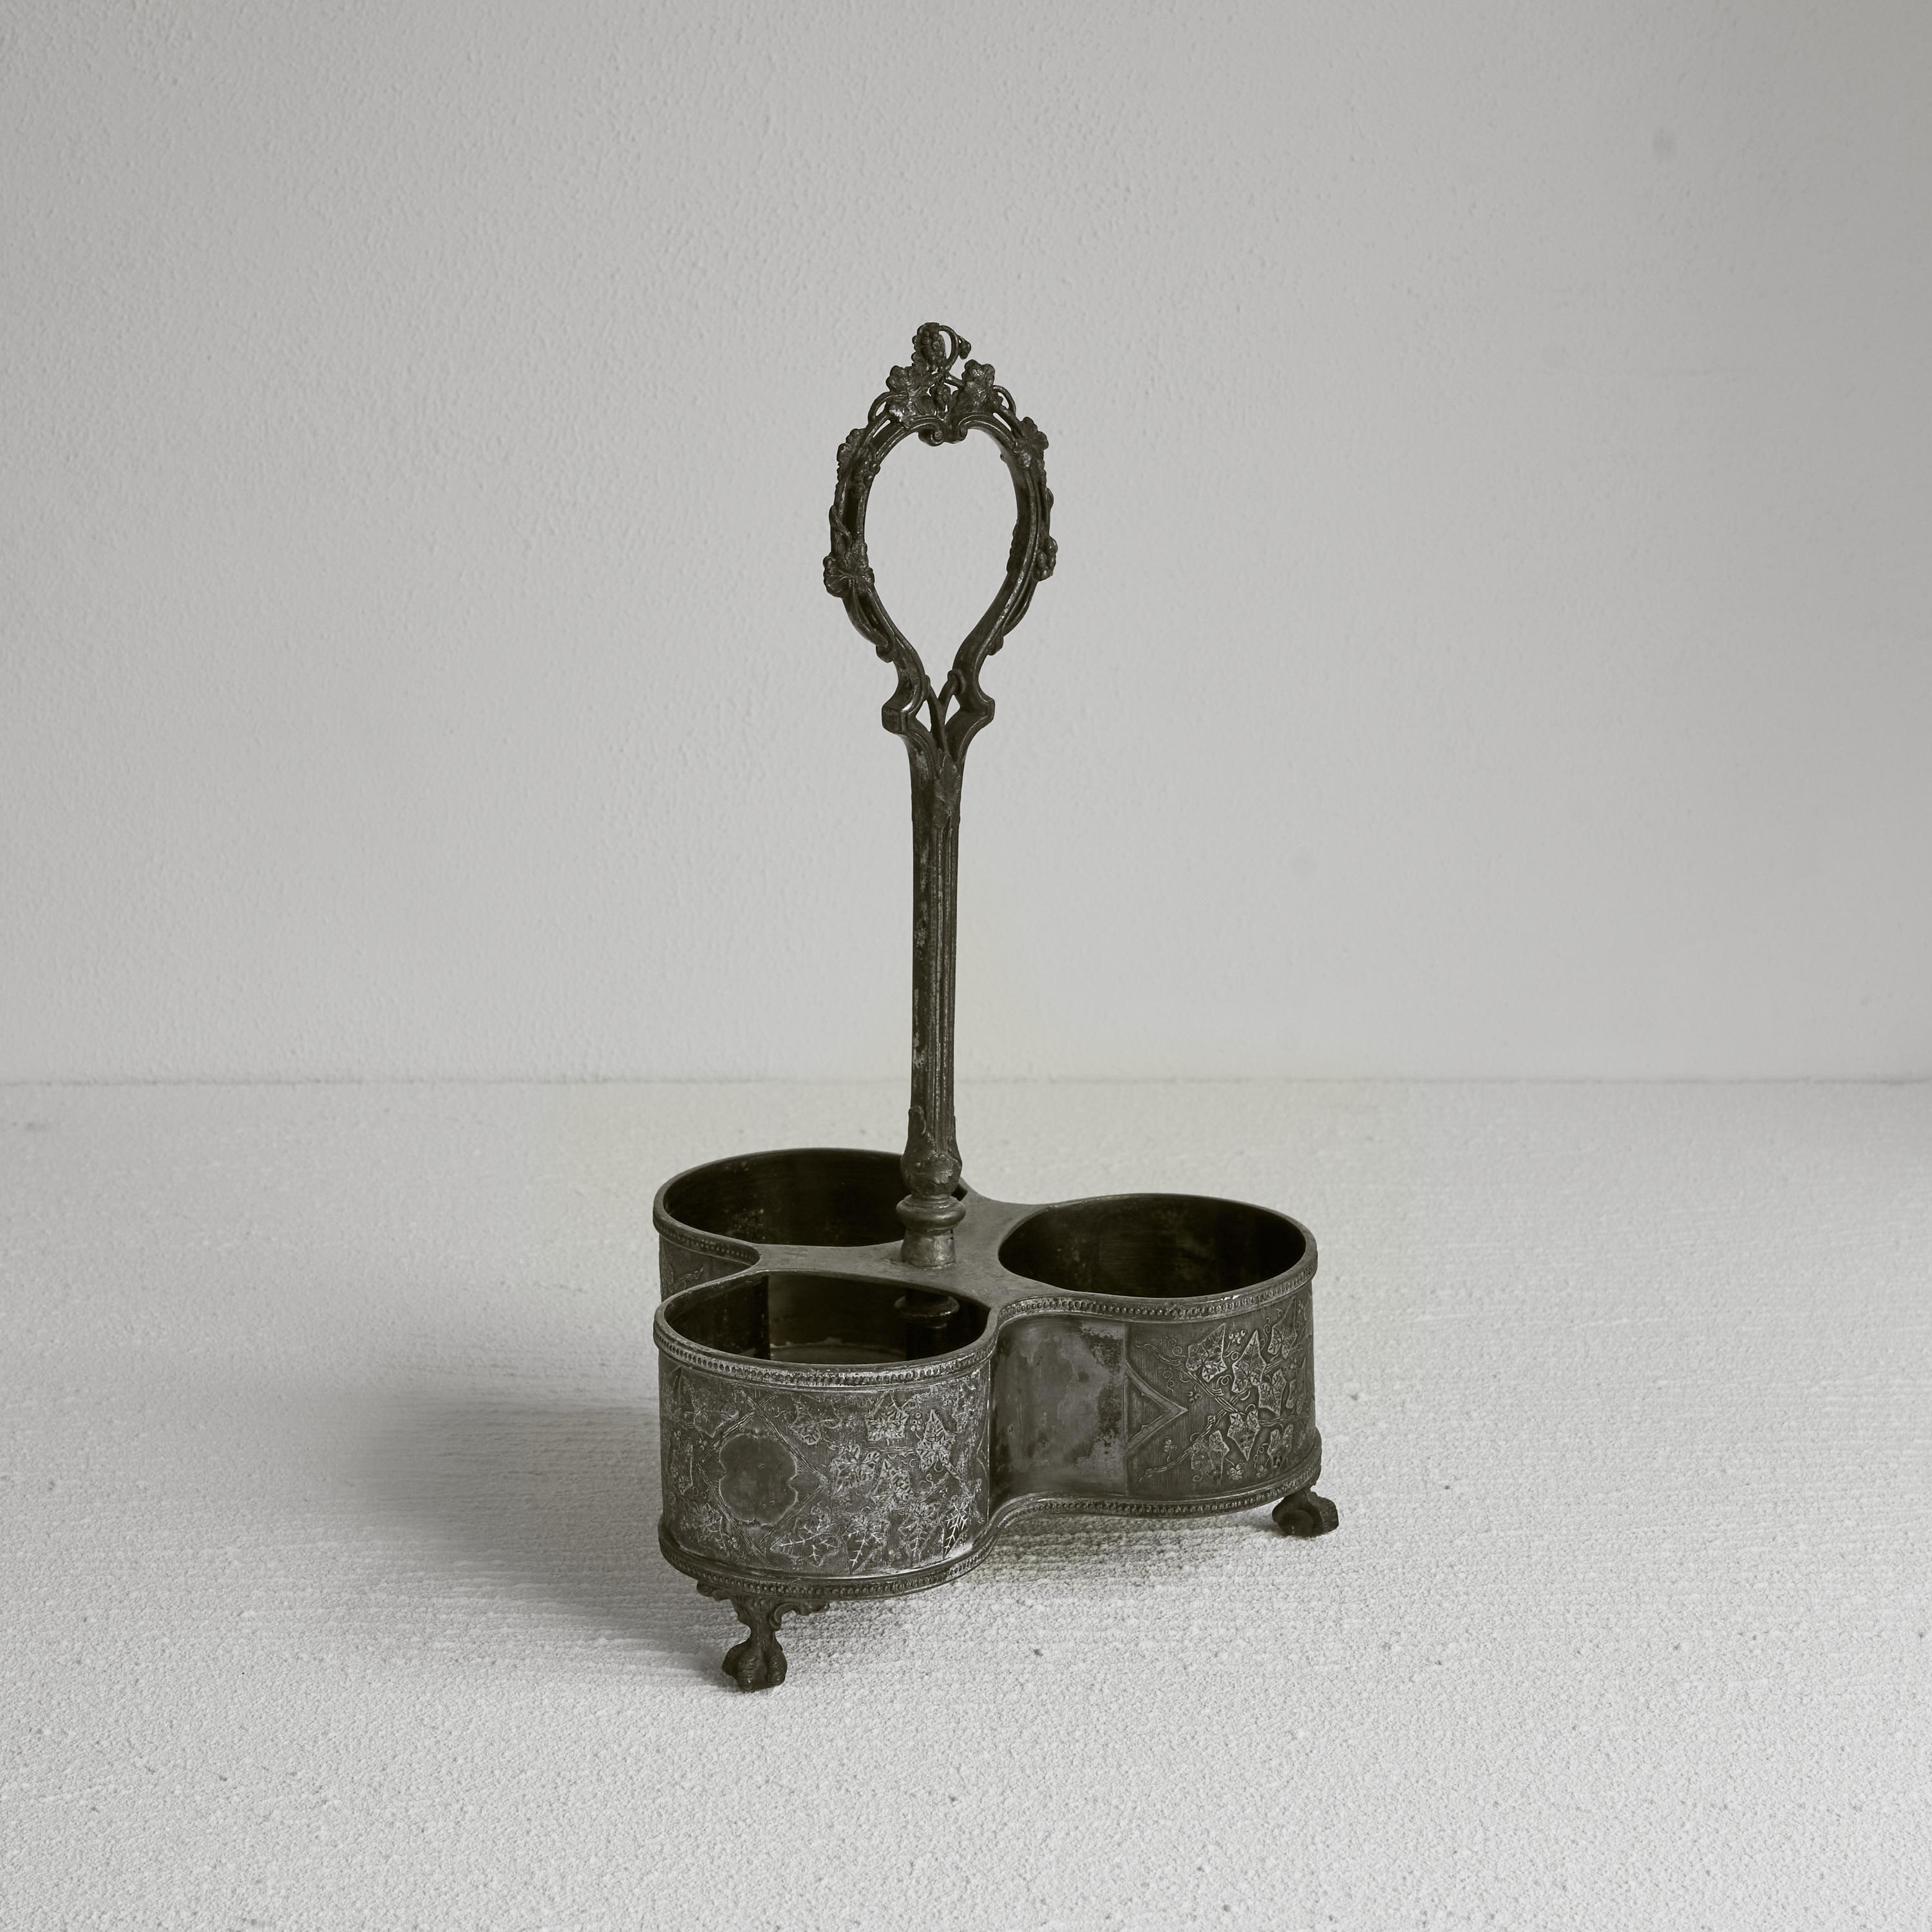 Shaw & Fisher Antique bottle holder in Patinated Silver. England, 19th century. 

Wonderful bottle holder in patinated silver made by Shaw & Fisher from Sheffield. Great Victorian design and a great appearance due to the general shape and